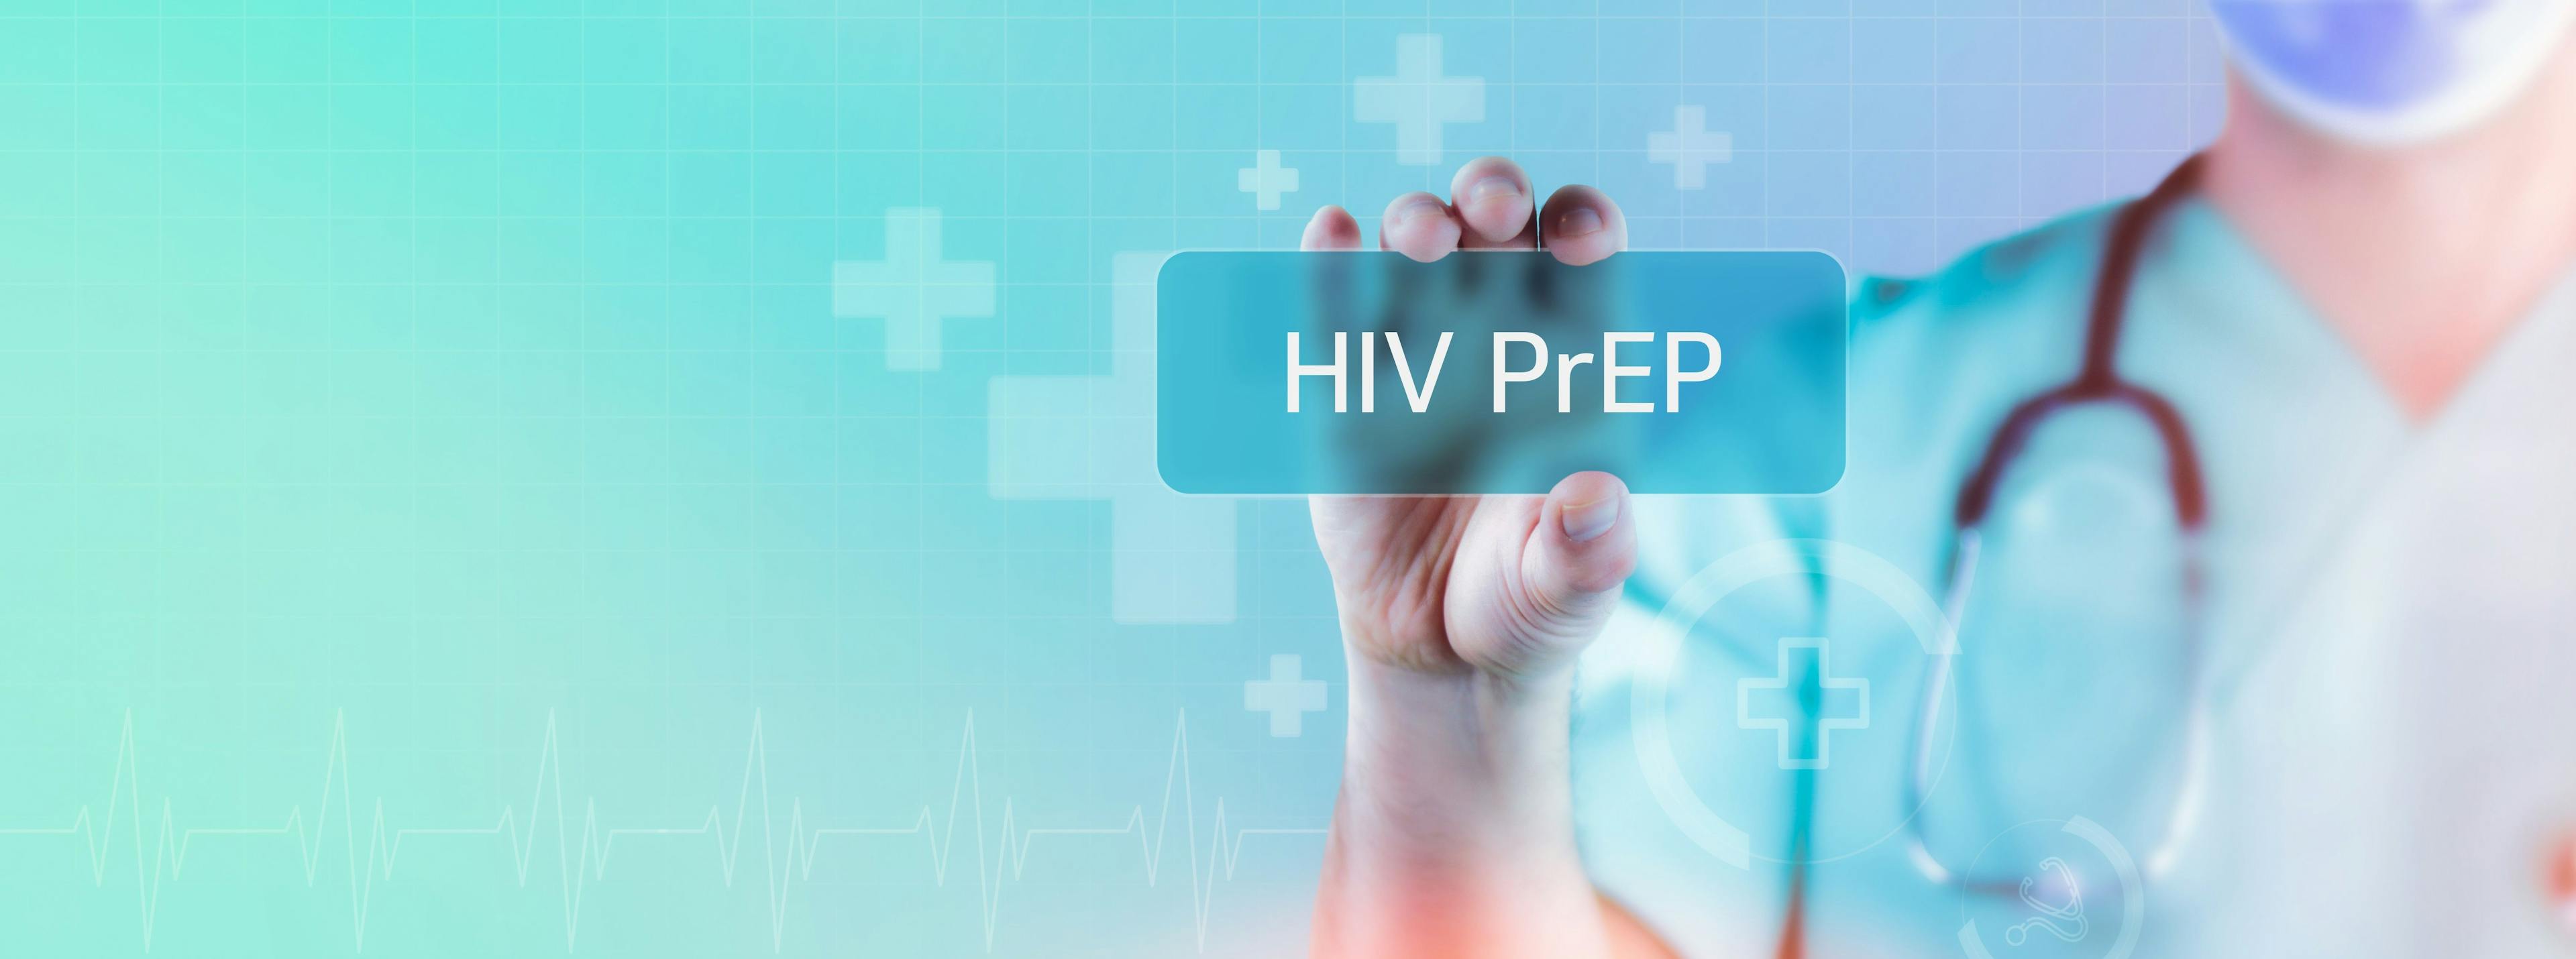 With PrEP Effort Lagging, Positive Results for Twice-Yearly Lenacapavir May Give a Lift | AIDS 2024